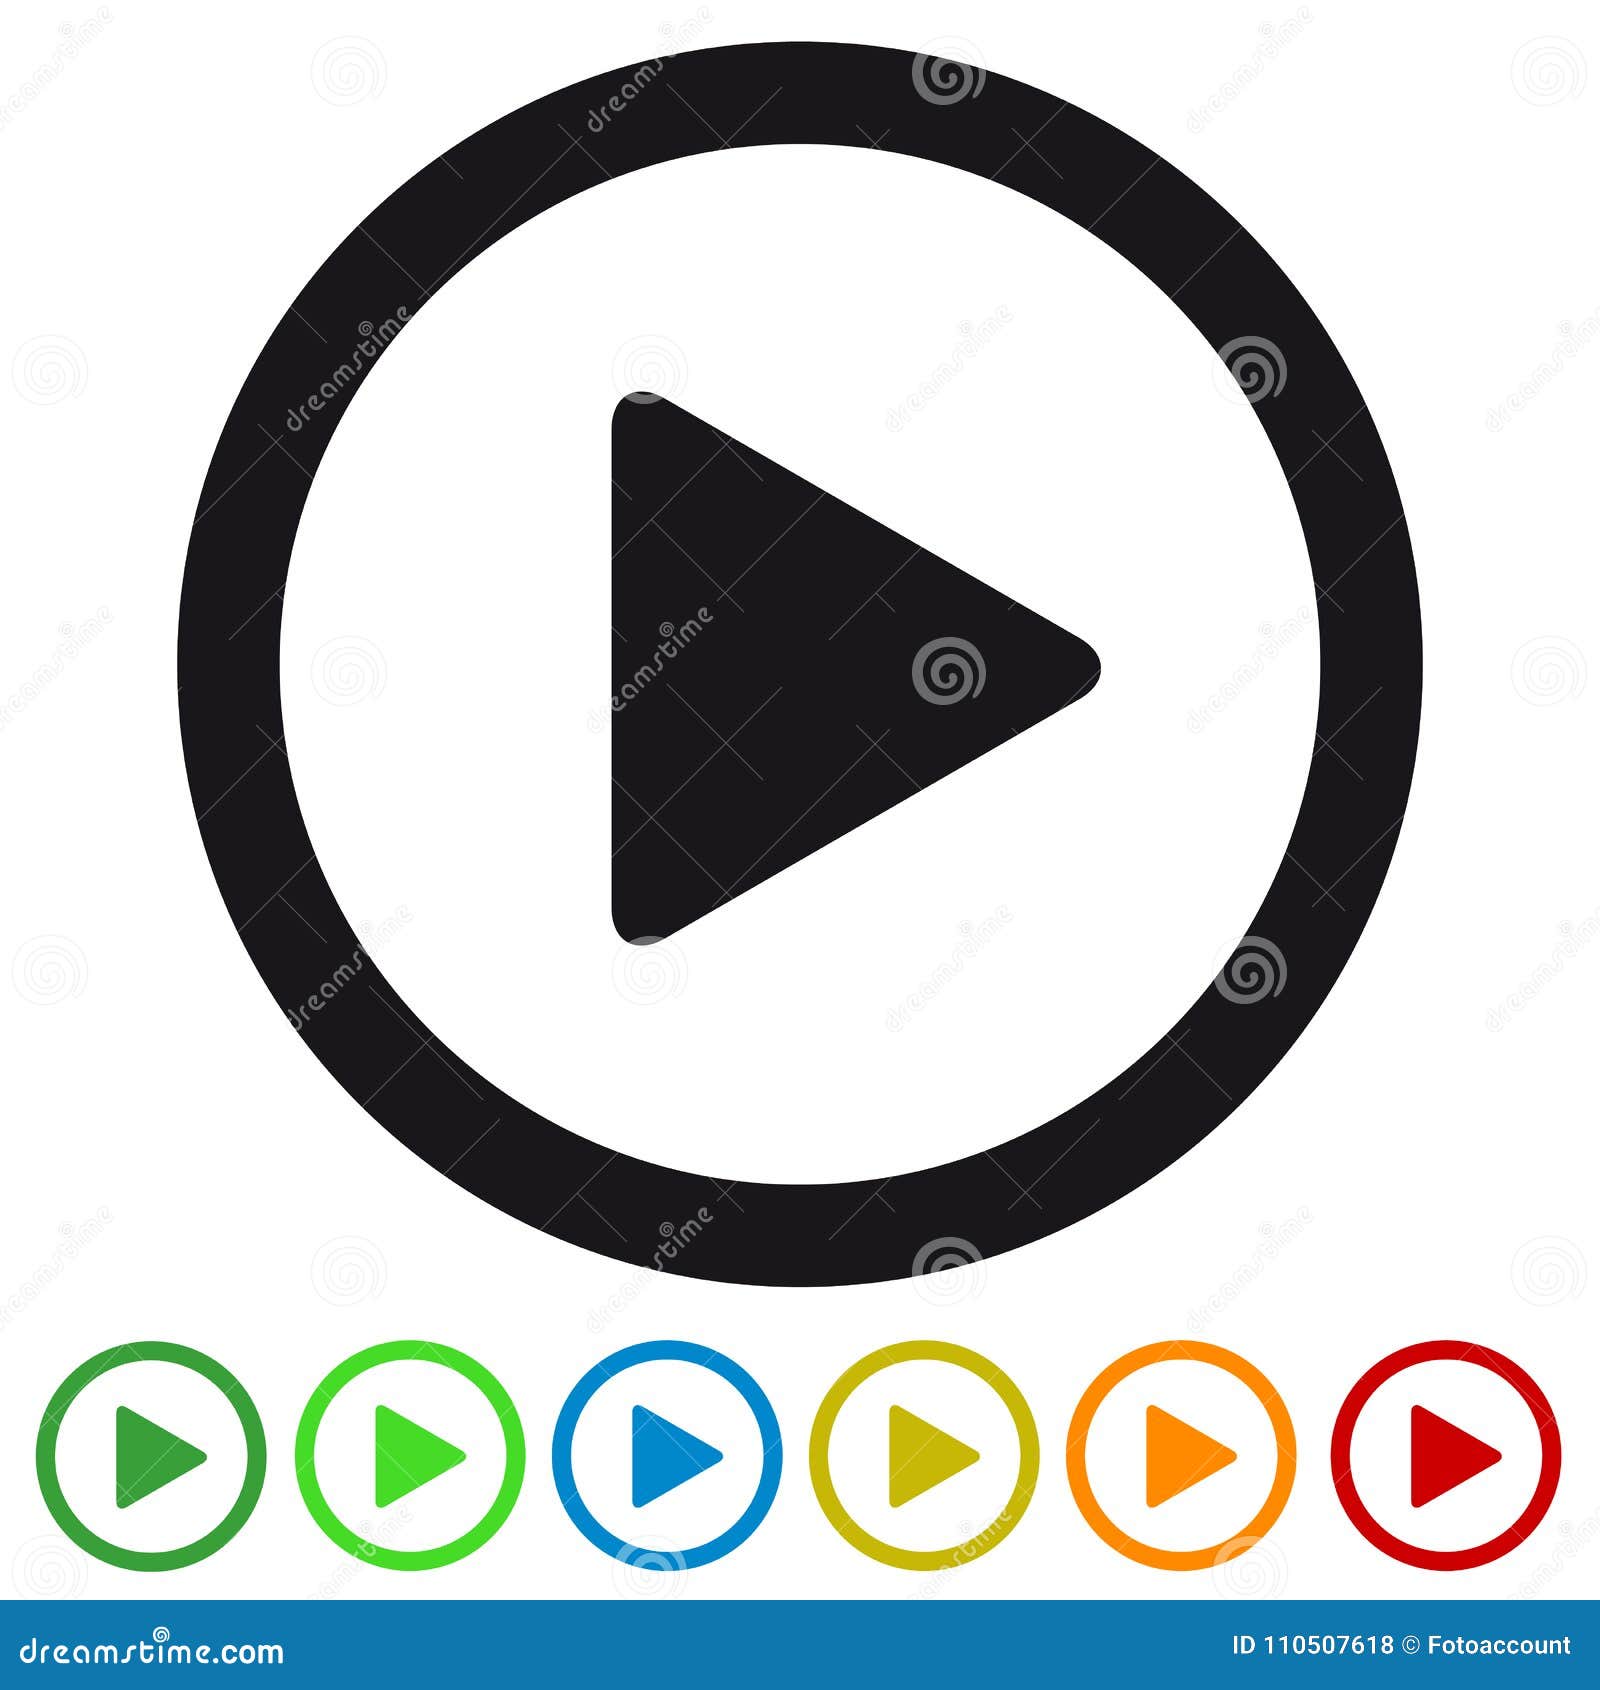 video media play button flat icon for apps and websites - colorful   -  on white